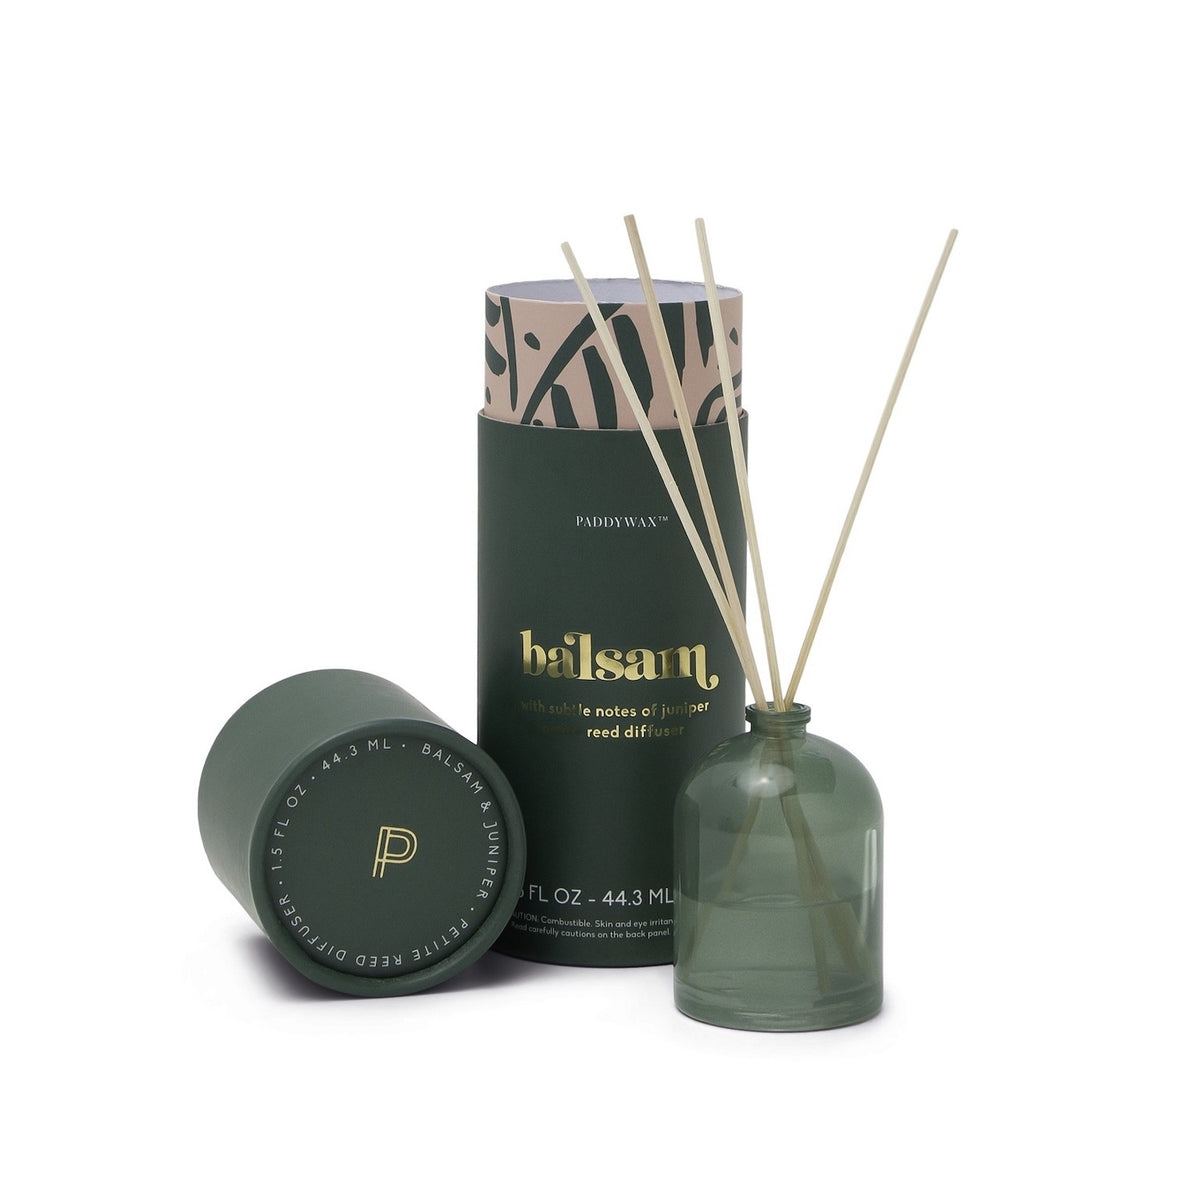 Balsam Reed Diffuser